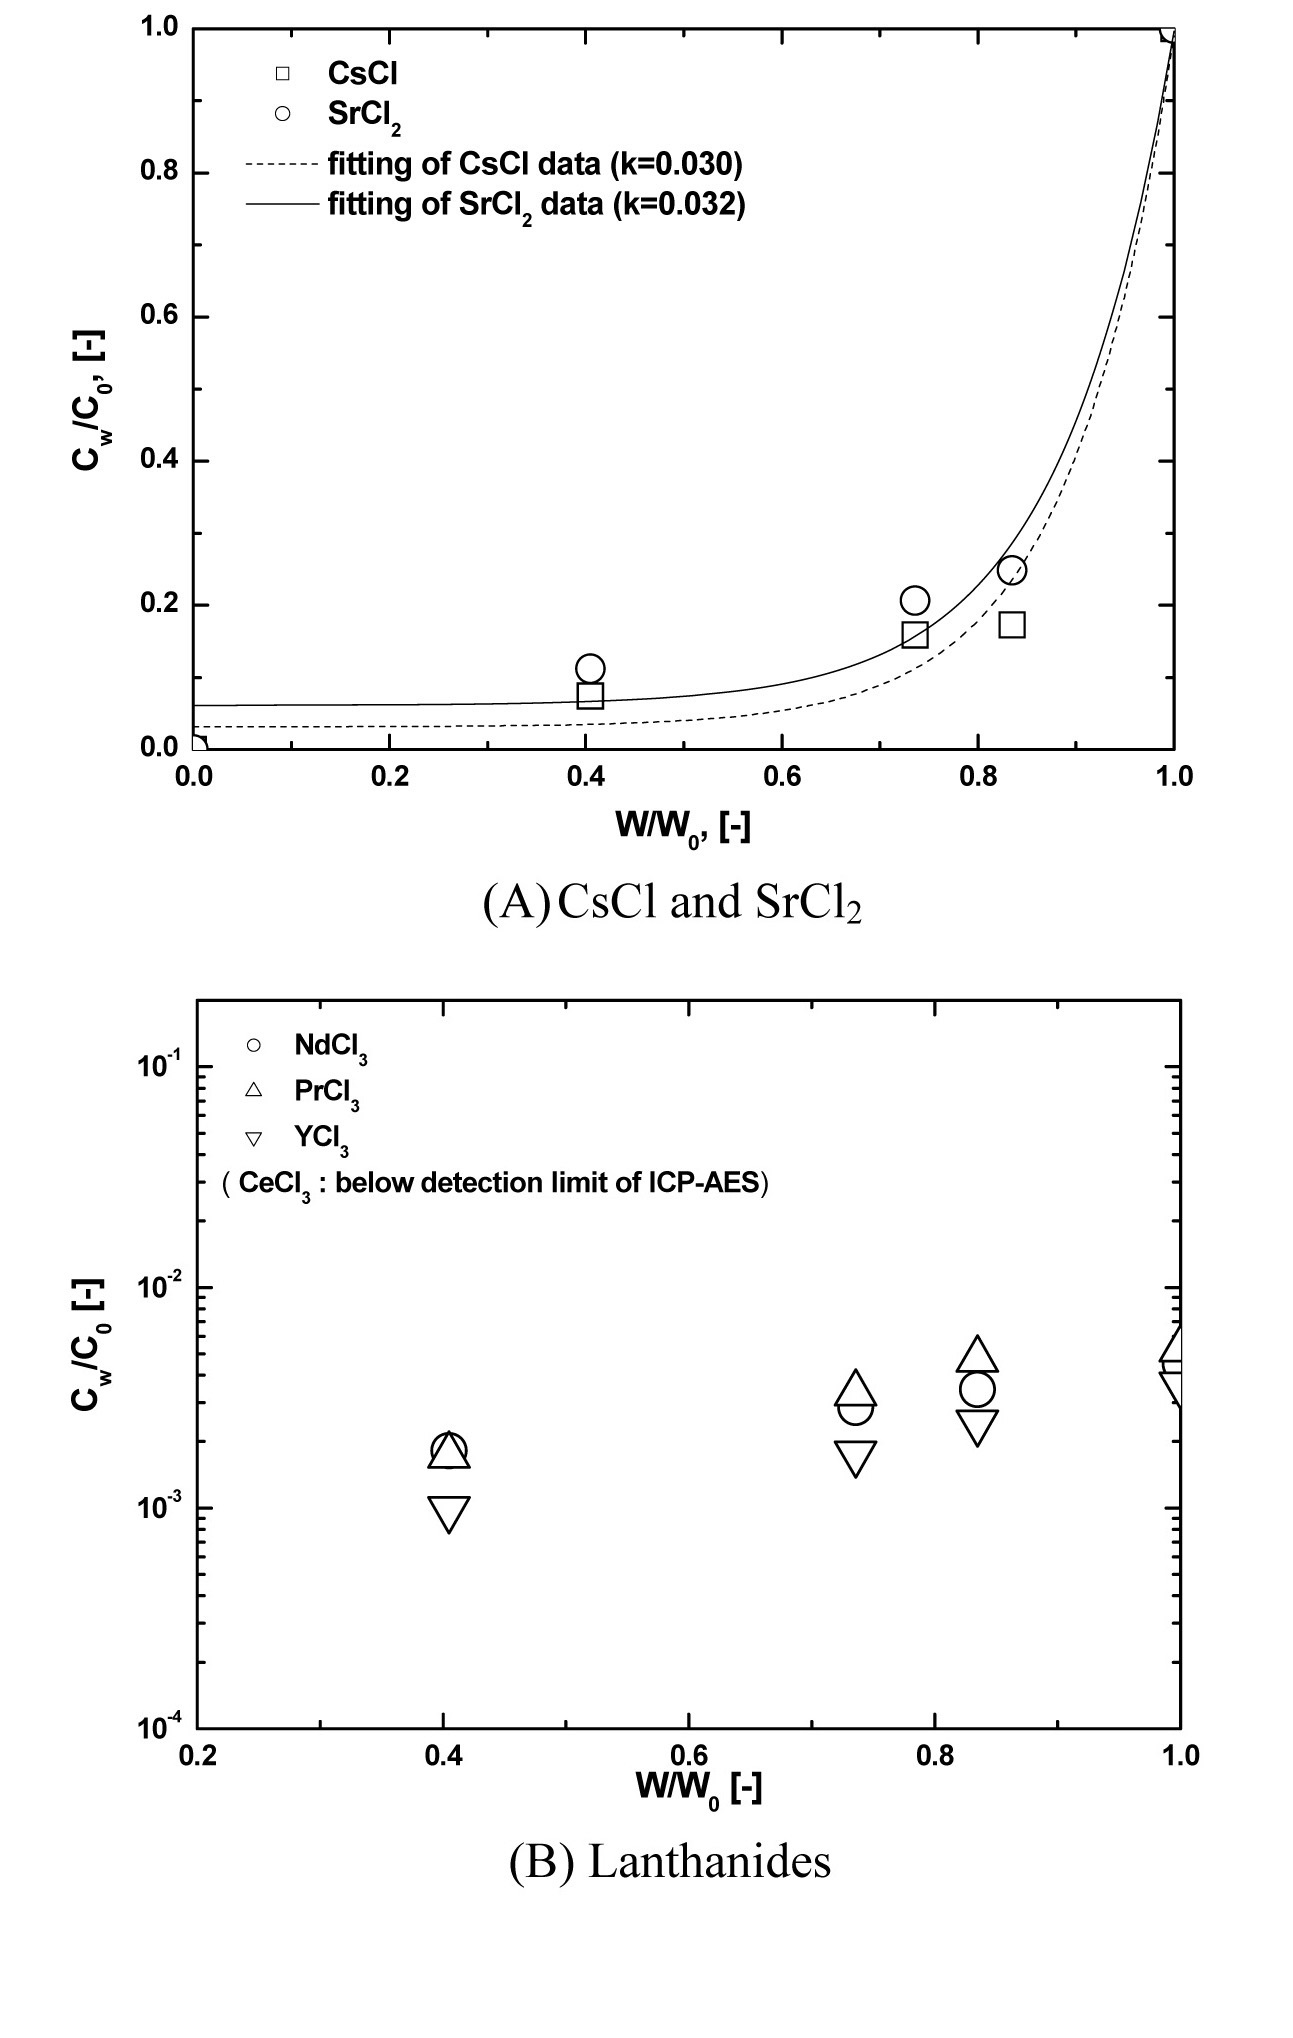 Examples of the Axial Concentration Distribution of Cs and Sr and Lanthanides in the Conditions of 3mm/hr Crucible Moving Speed and 800 ℃ Oxygen Spaging Temperature.